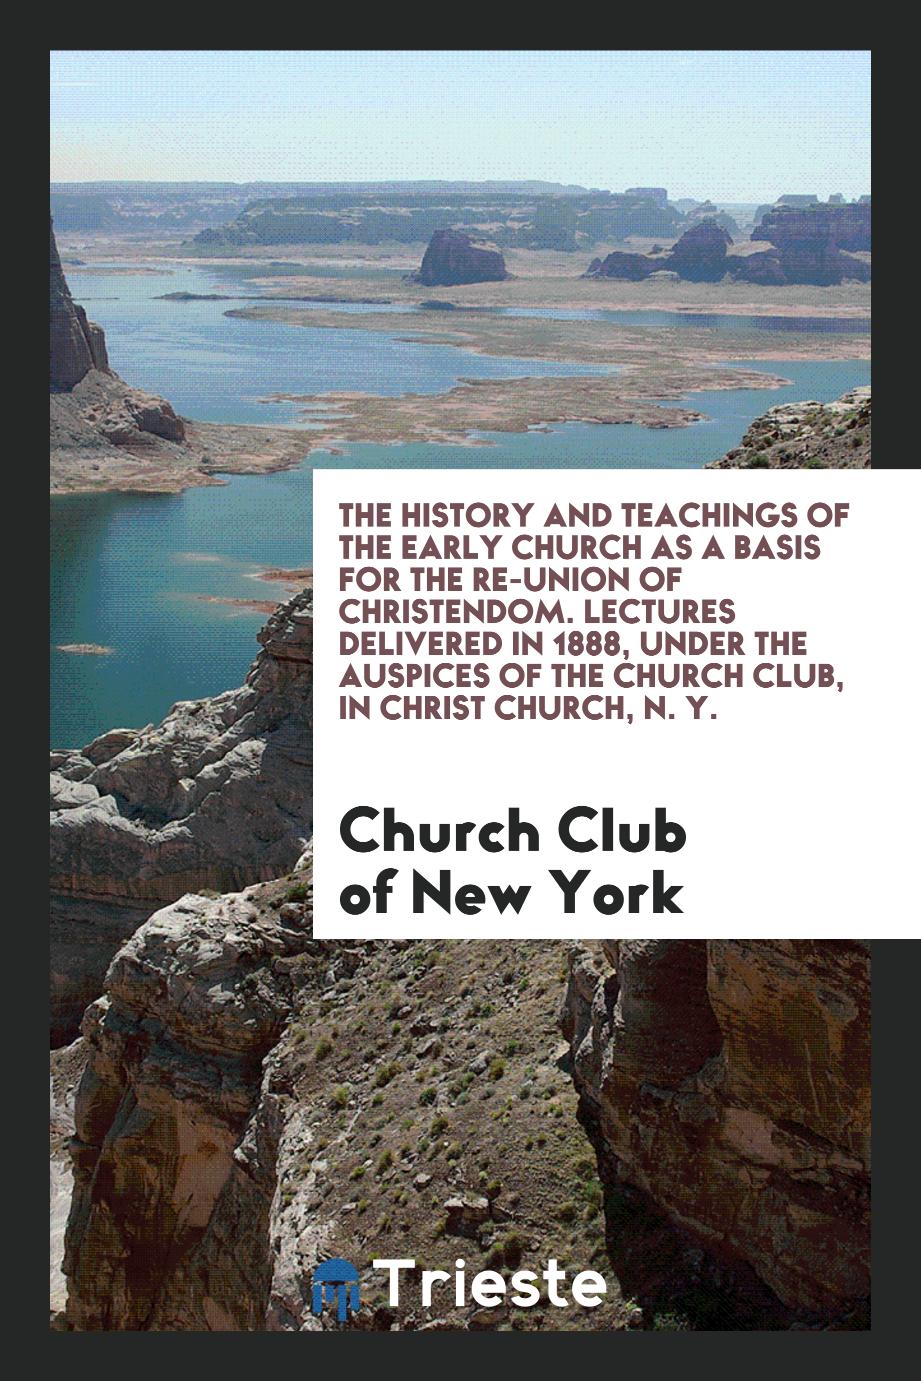 The History and Teachings of the Early Church as a Basis for the Re-Union of Christendom. Lectures Delivered in 1888, under the Auspices of the Church Club, in Christ Church, N. Y.